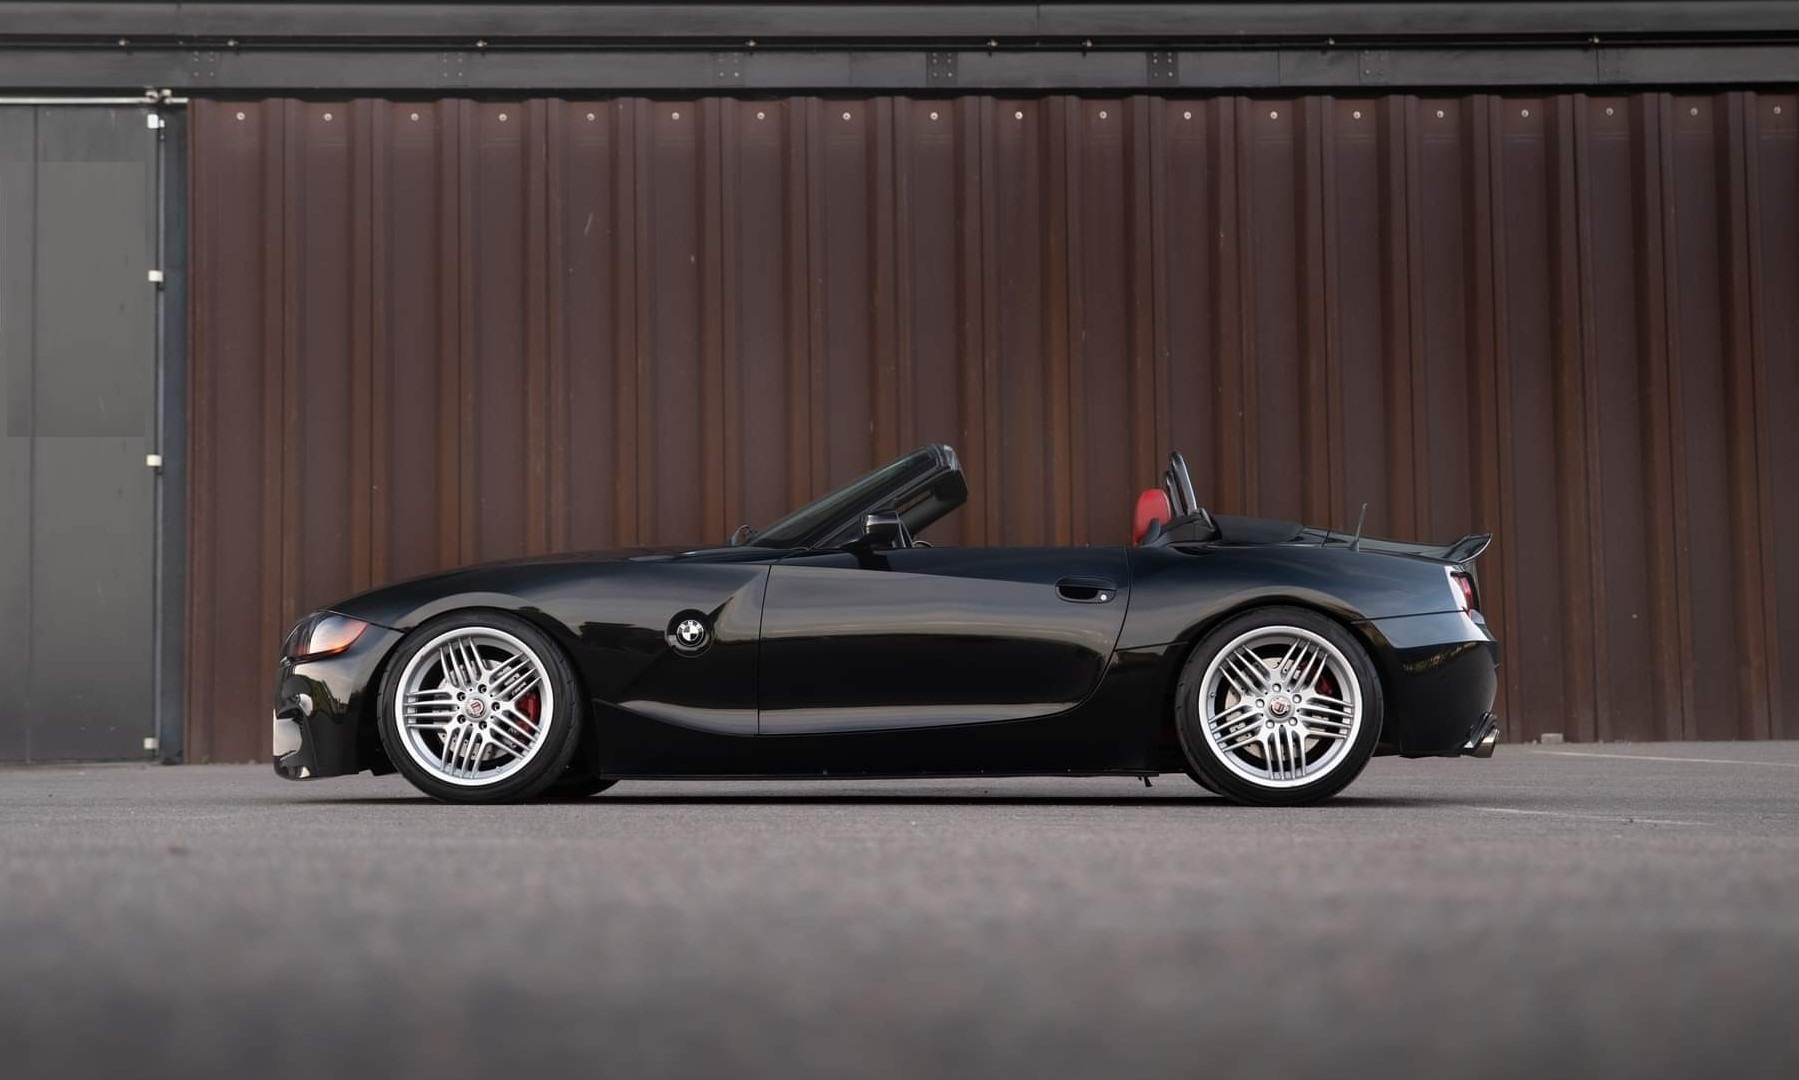 This is a V12-powered BMW Z3